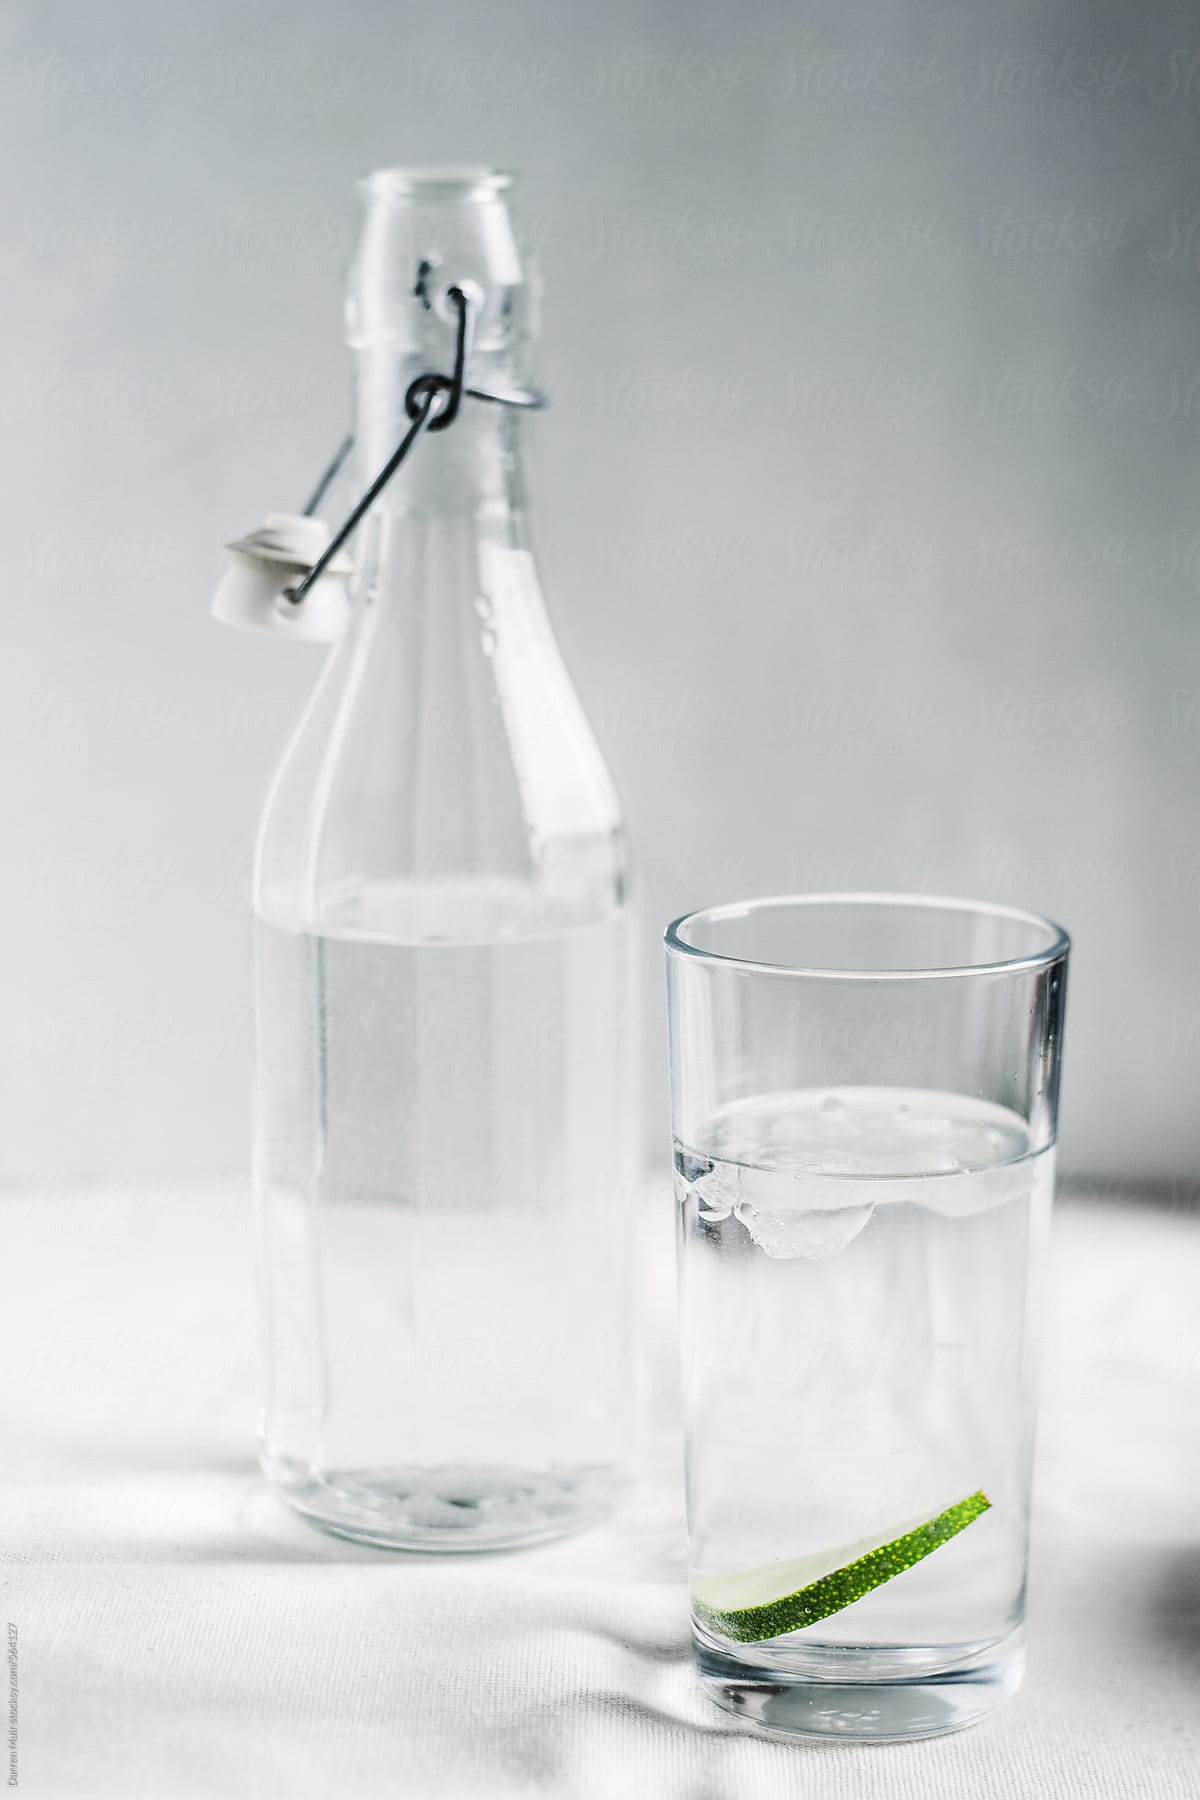 Glass and bottle of water on off white background.